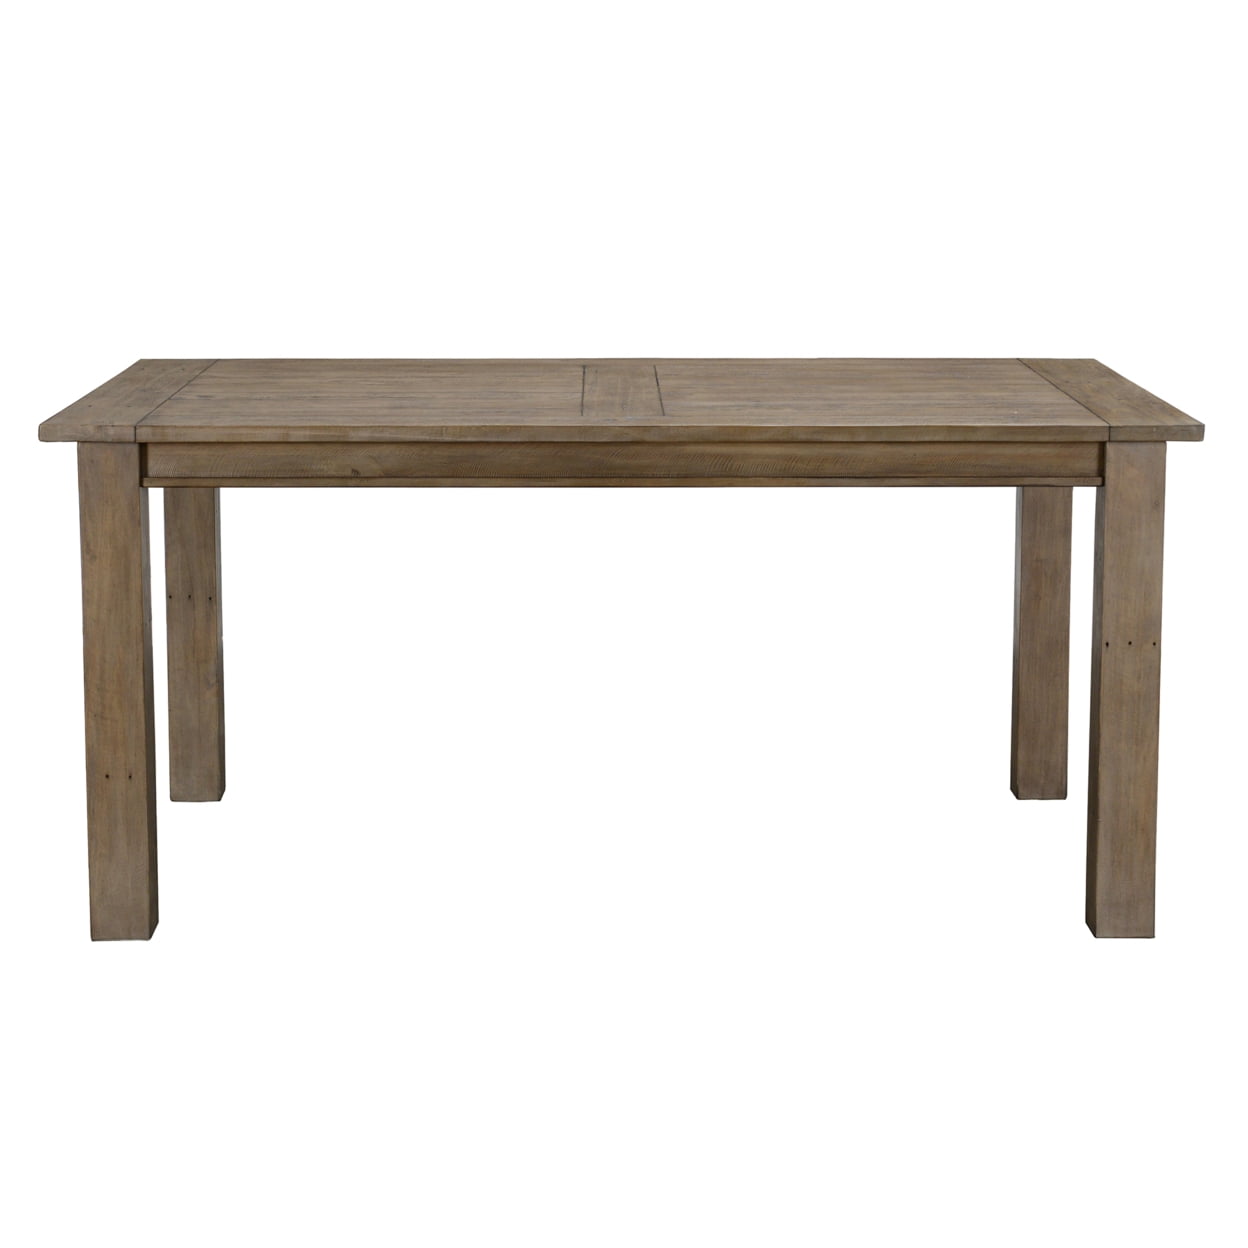 Bm210363 Plank Style Reclaimed Wood Dining Table With Grains & Knots - Brown - 30 X 60 X 36 In.